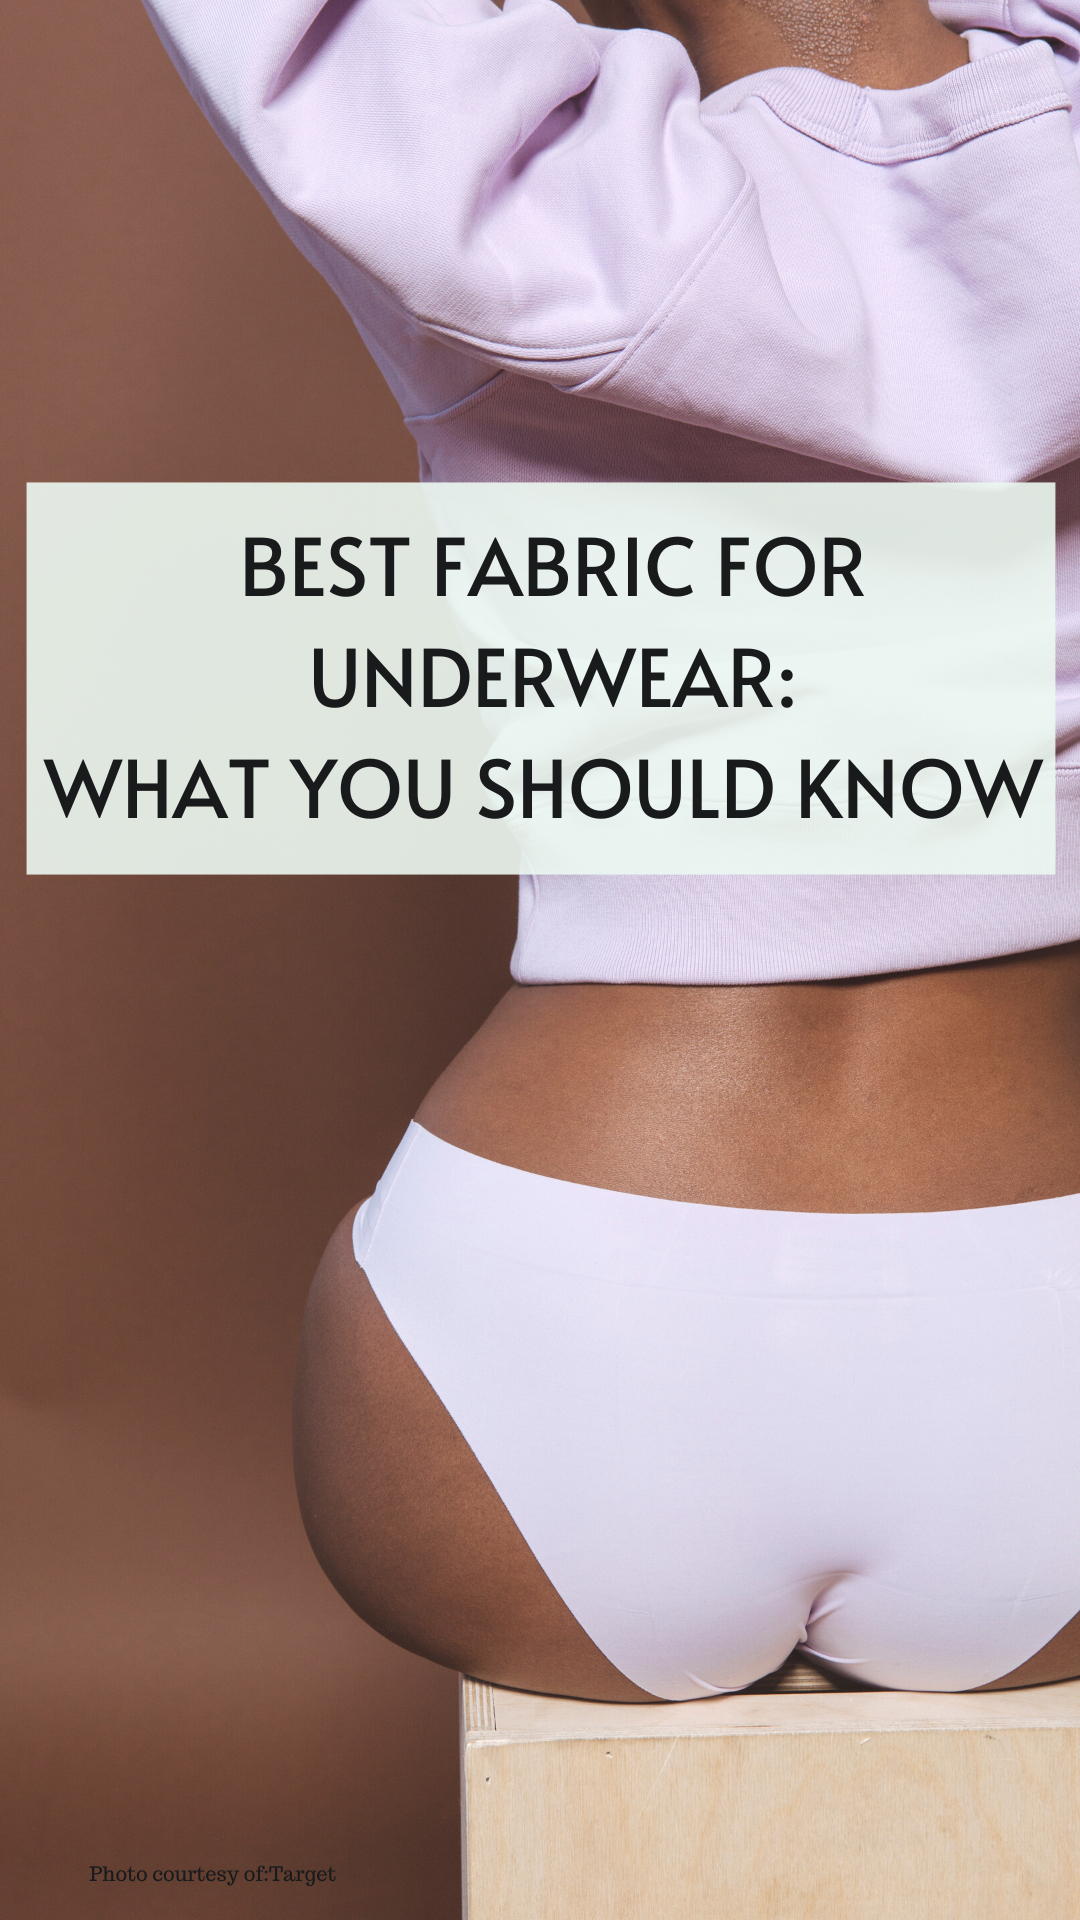 https://www.itsmeladyg.com/wp-content/uploads/2023/04/best-fabric-for-underwear-what-you-should-know.png